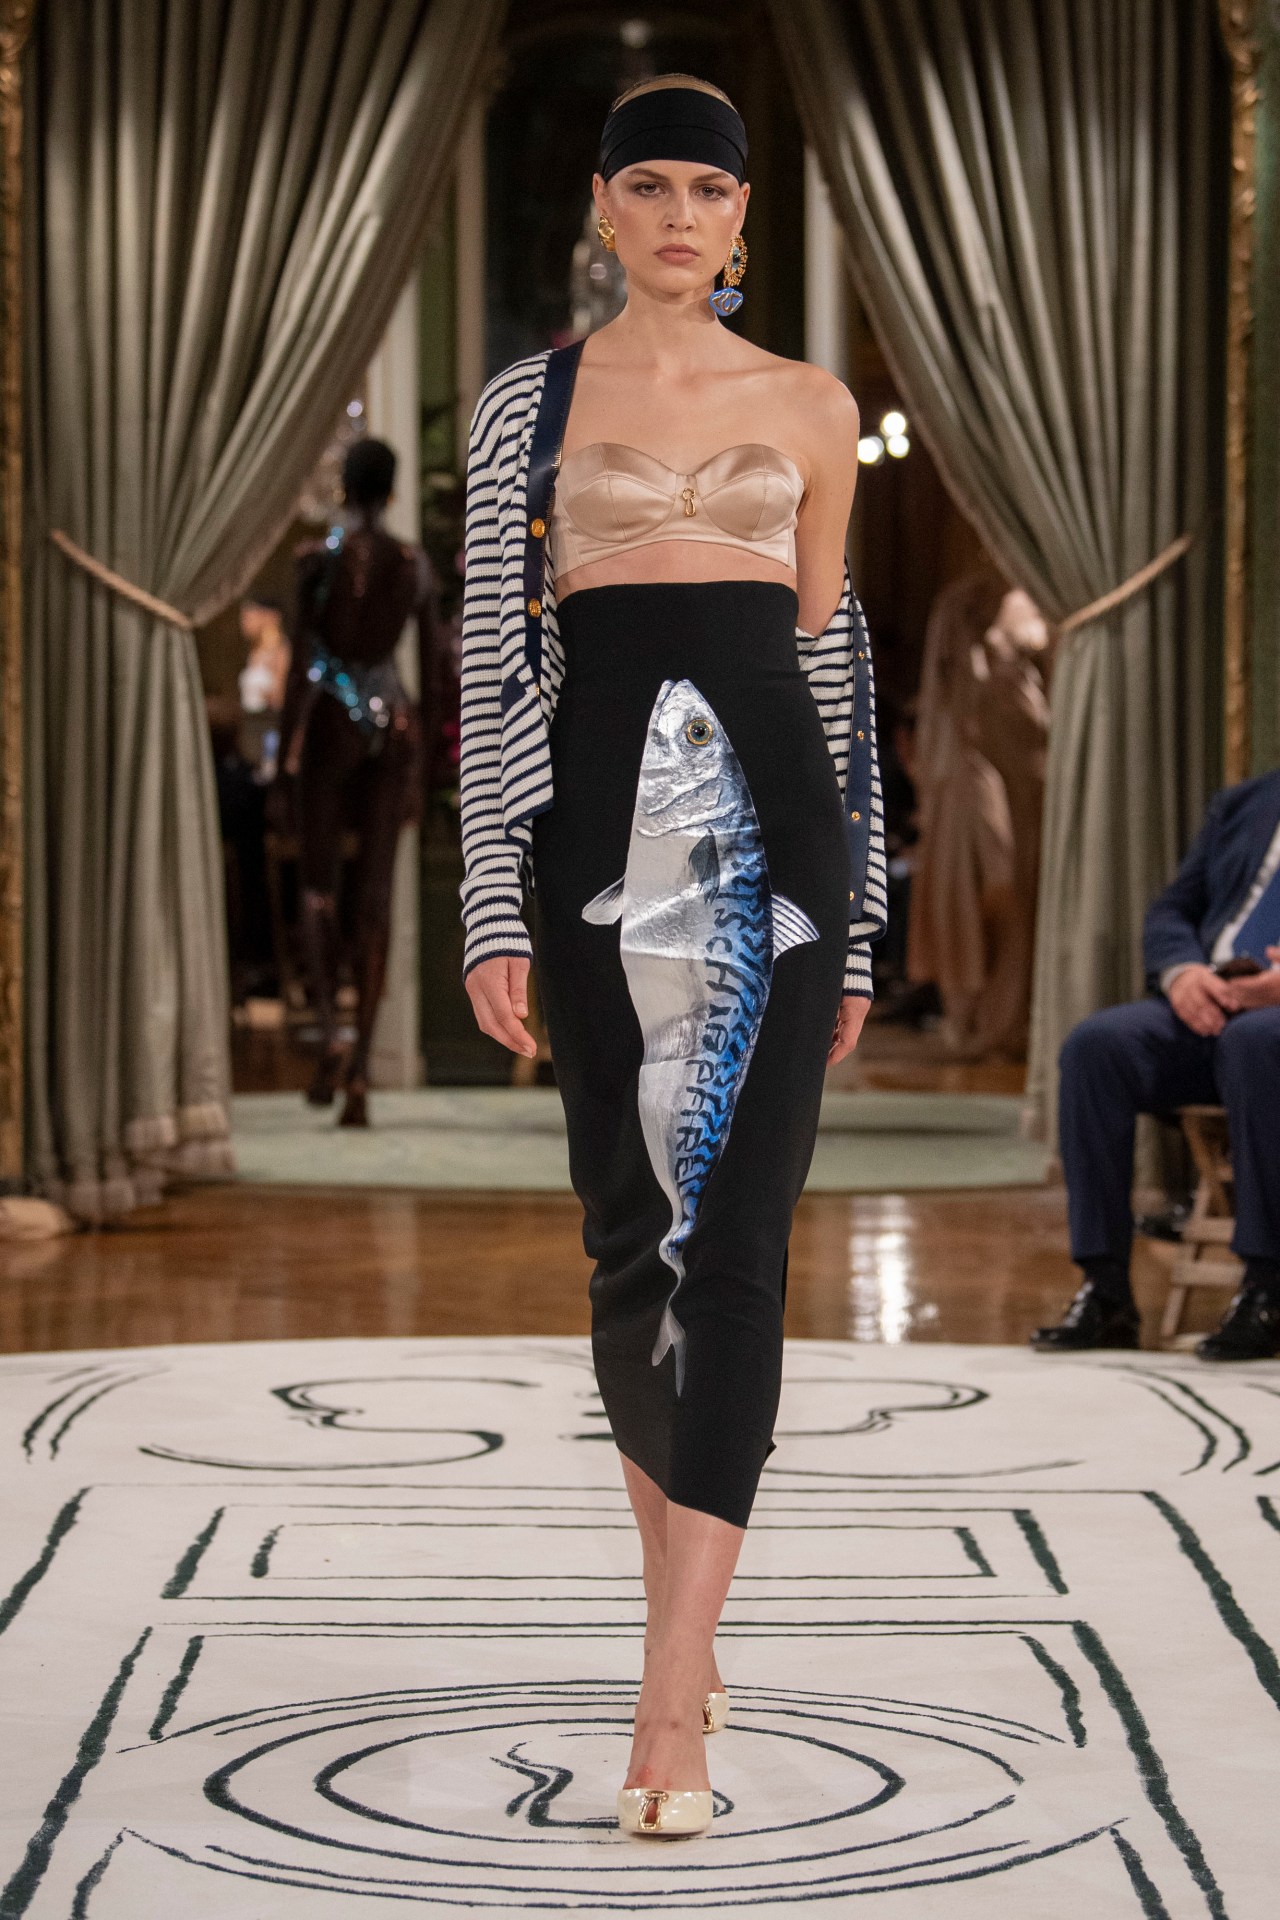 Schiaparelli sent an electrode encrusted baby down its space couture runway